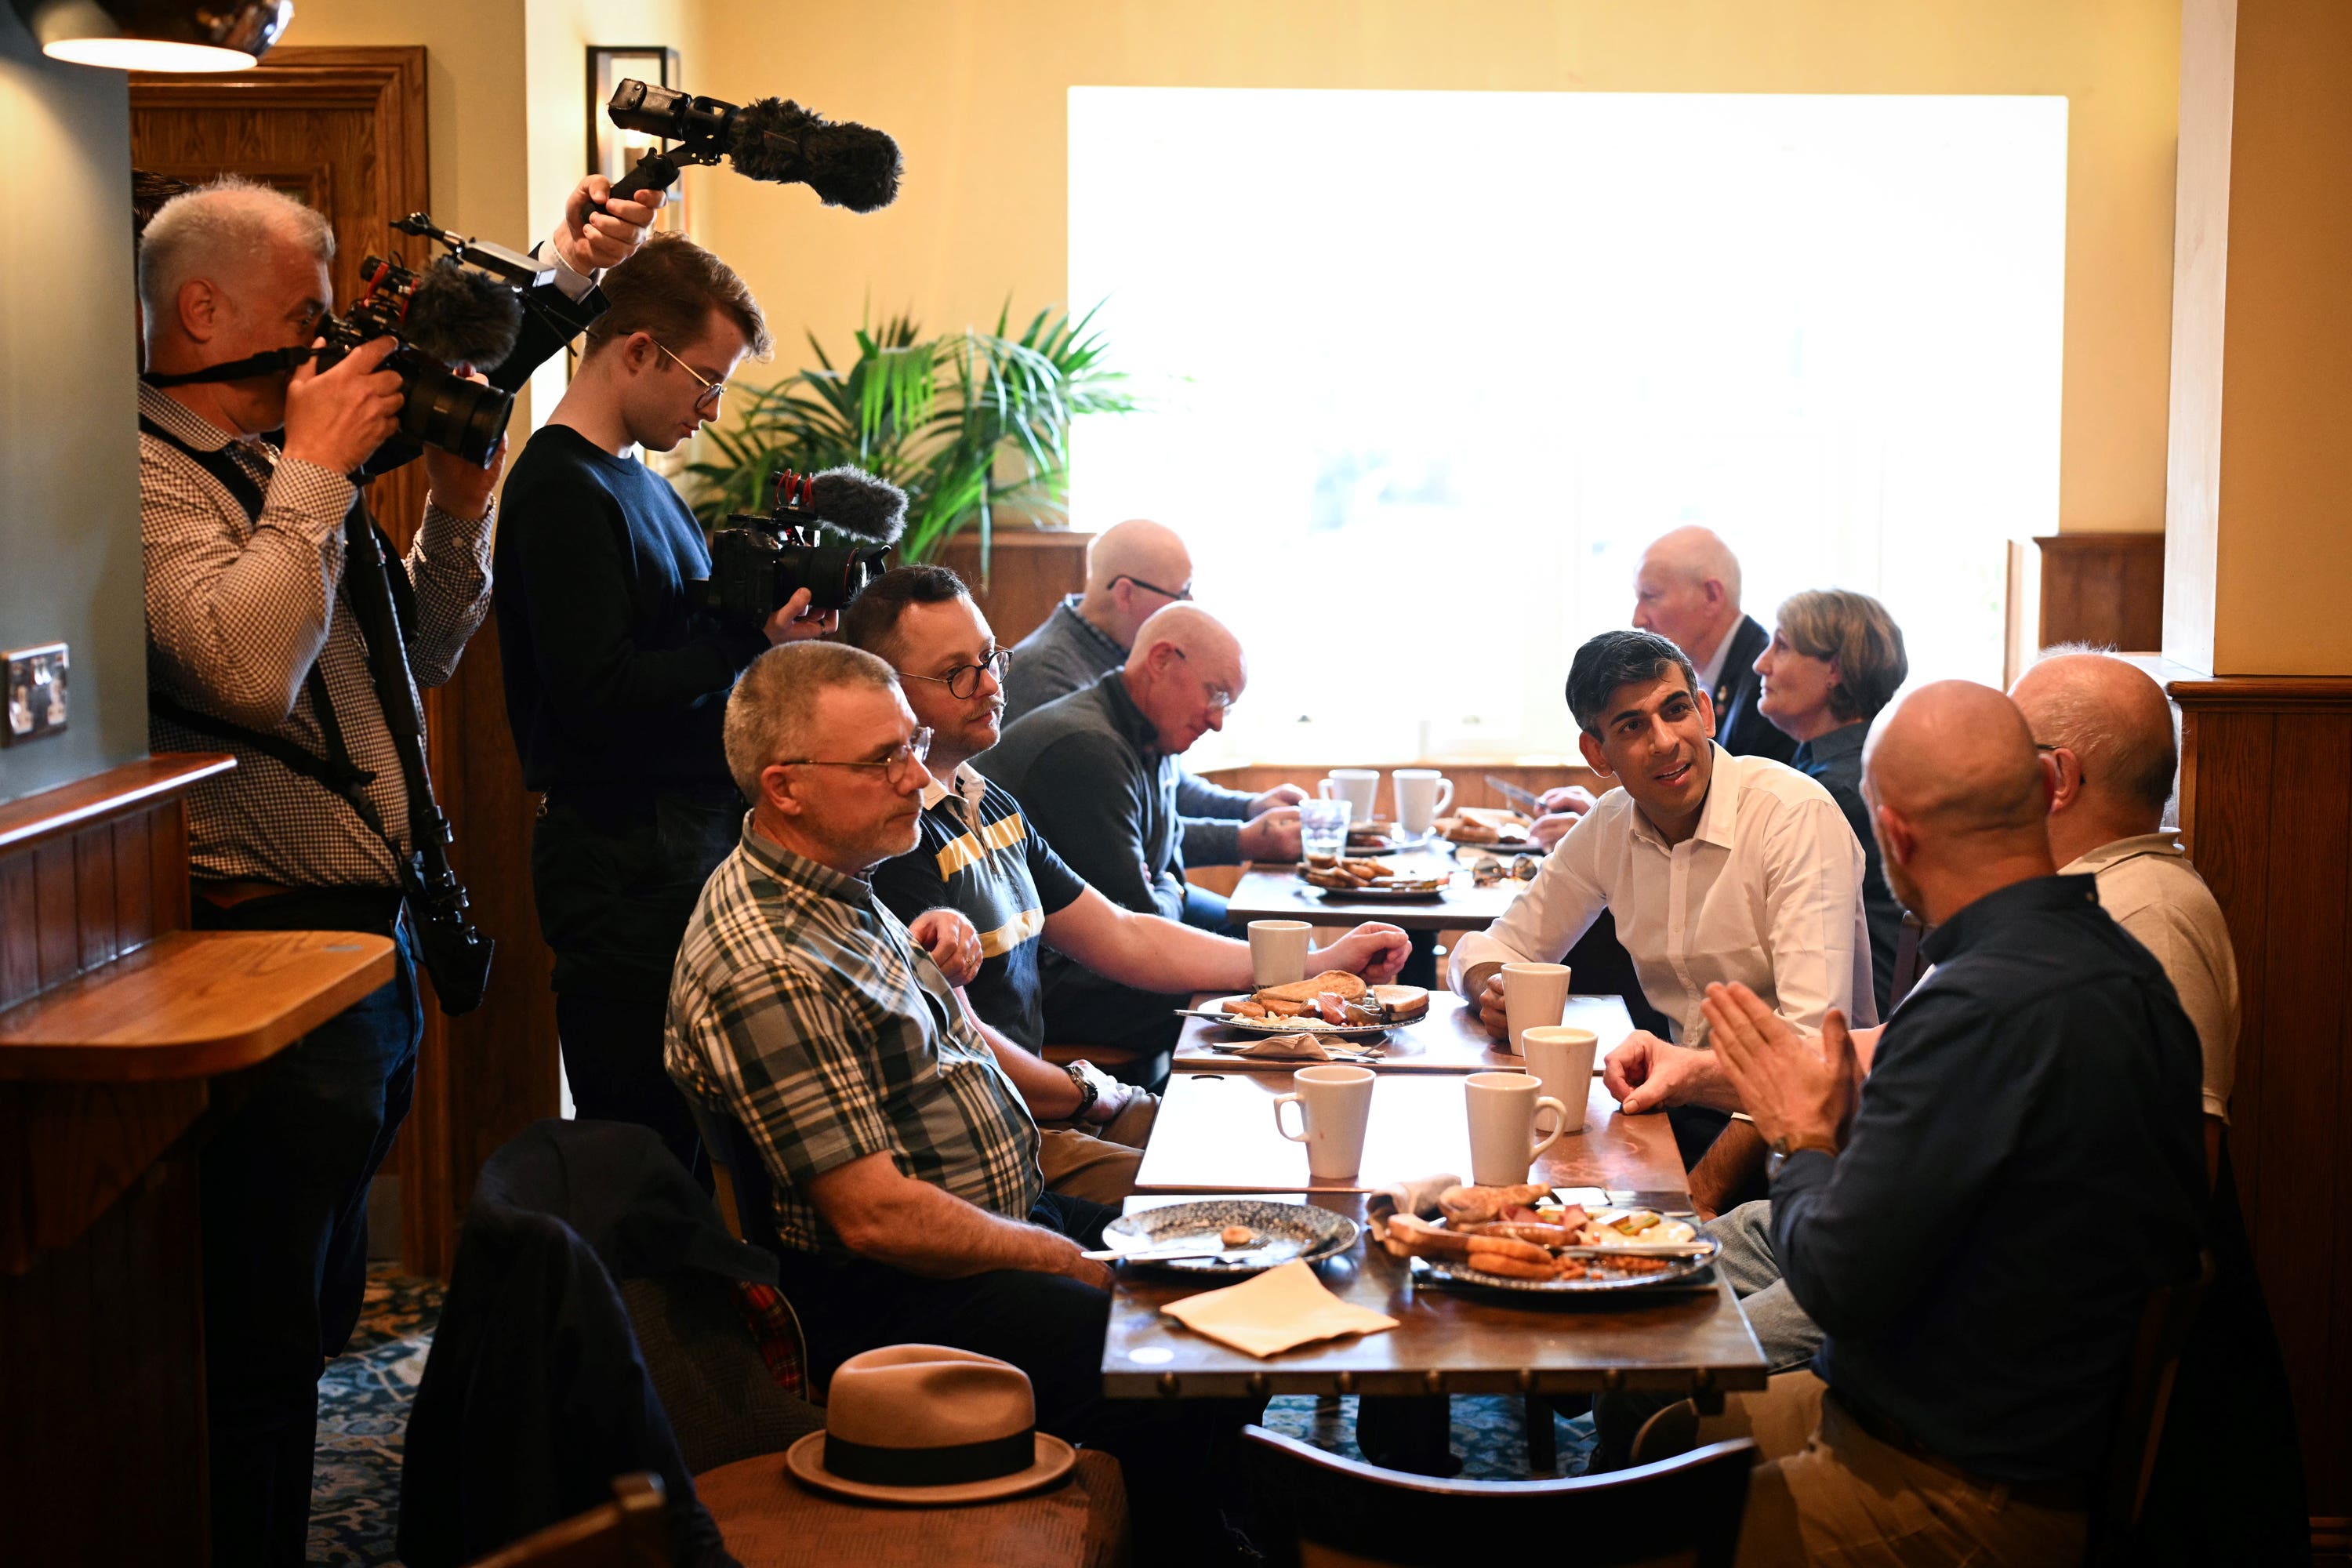 Rishi Sunak has held events in his own Yorkshire constituency of Richmond and Northallerton during the election campaign, including meeting veterans at a community breakfast